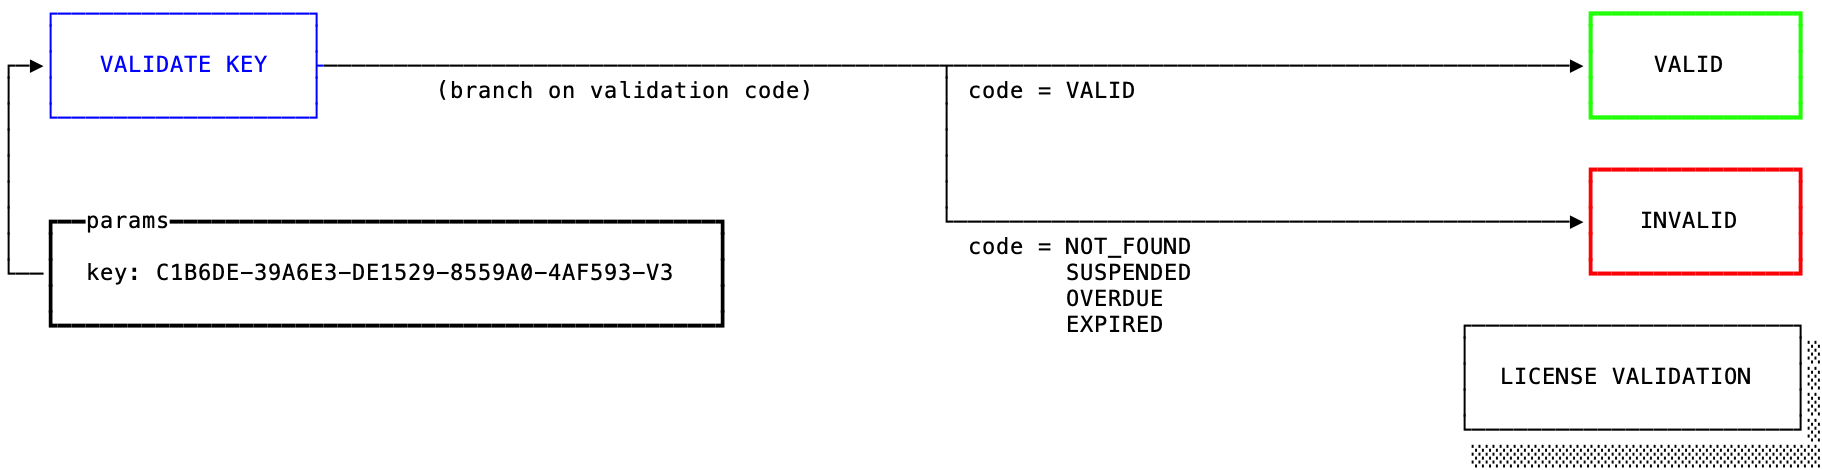 Diagram of validating a timed license key